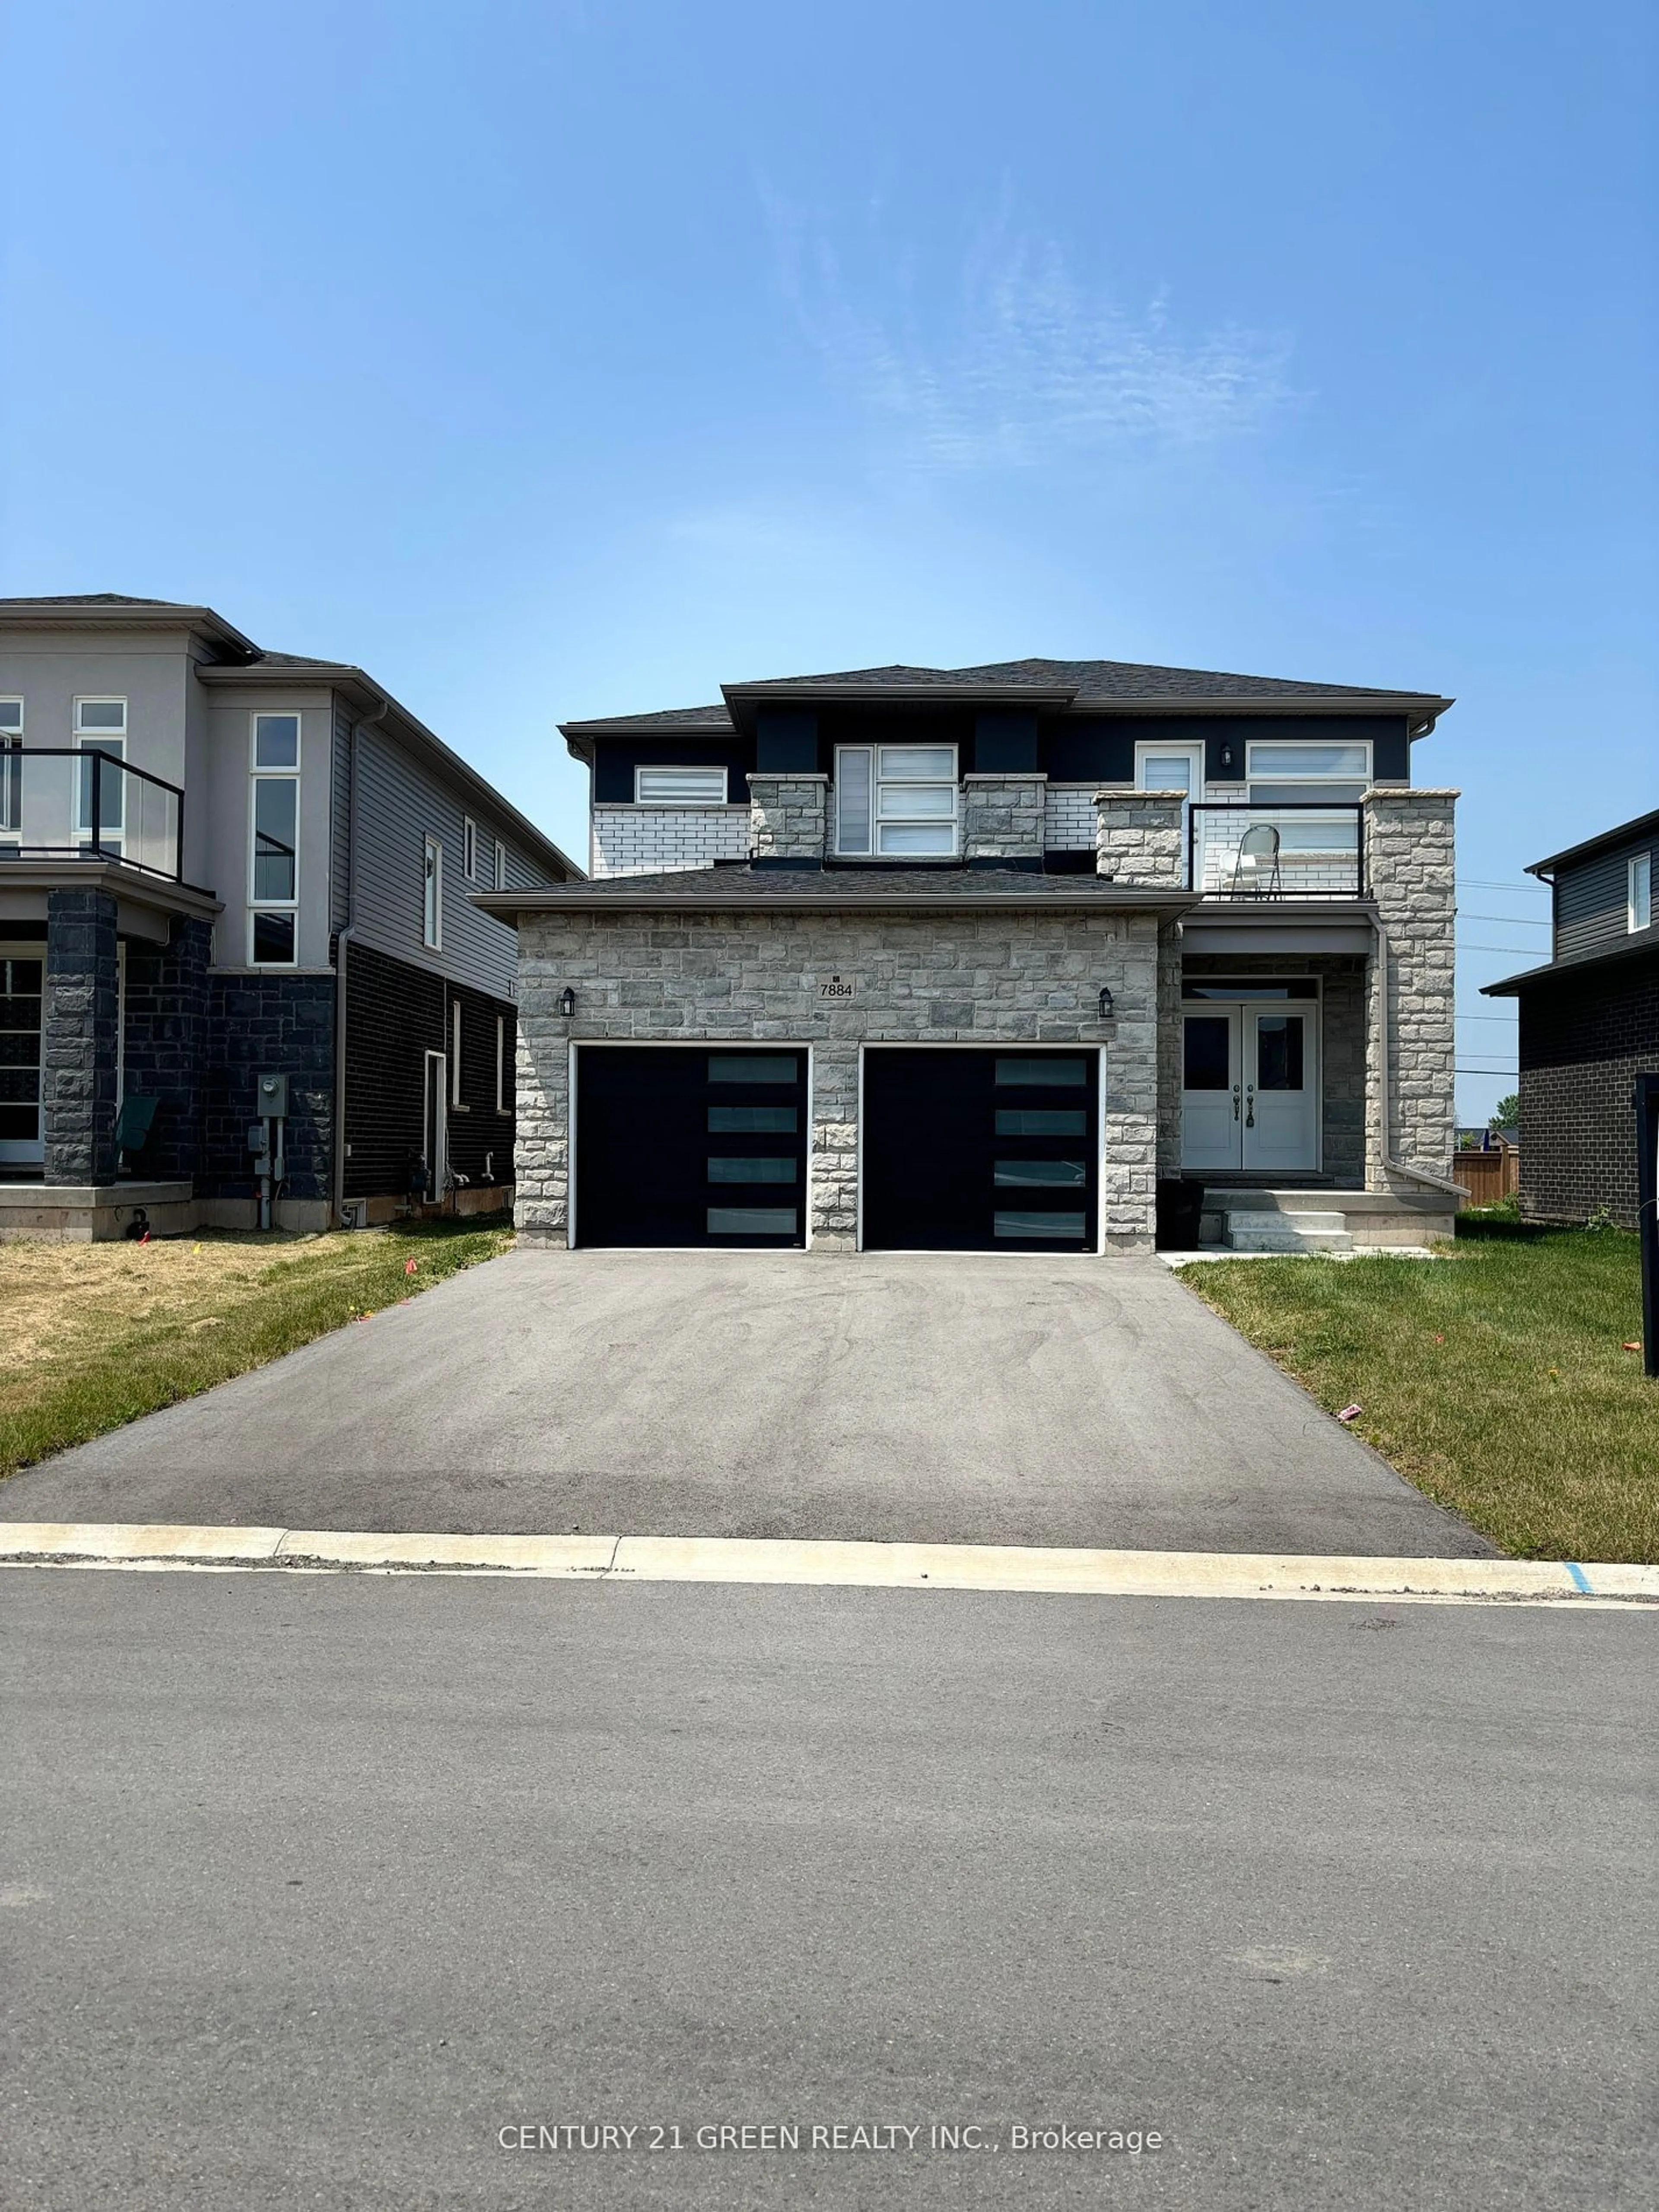 Frontside or backside of a home for 7884 Seabiscuite Dr, Niagara Falls Ontario L2H 3T9